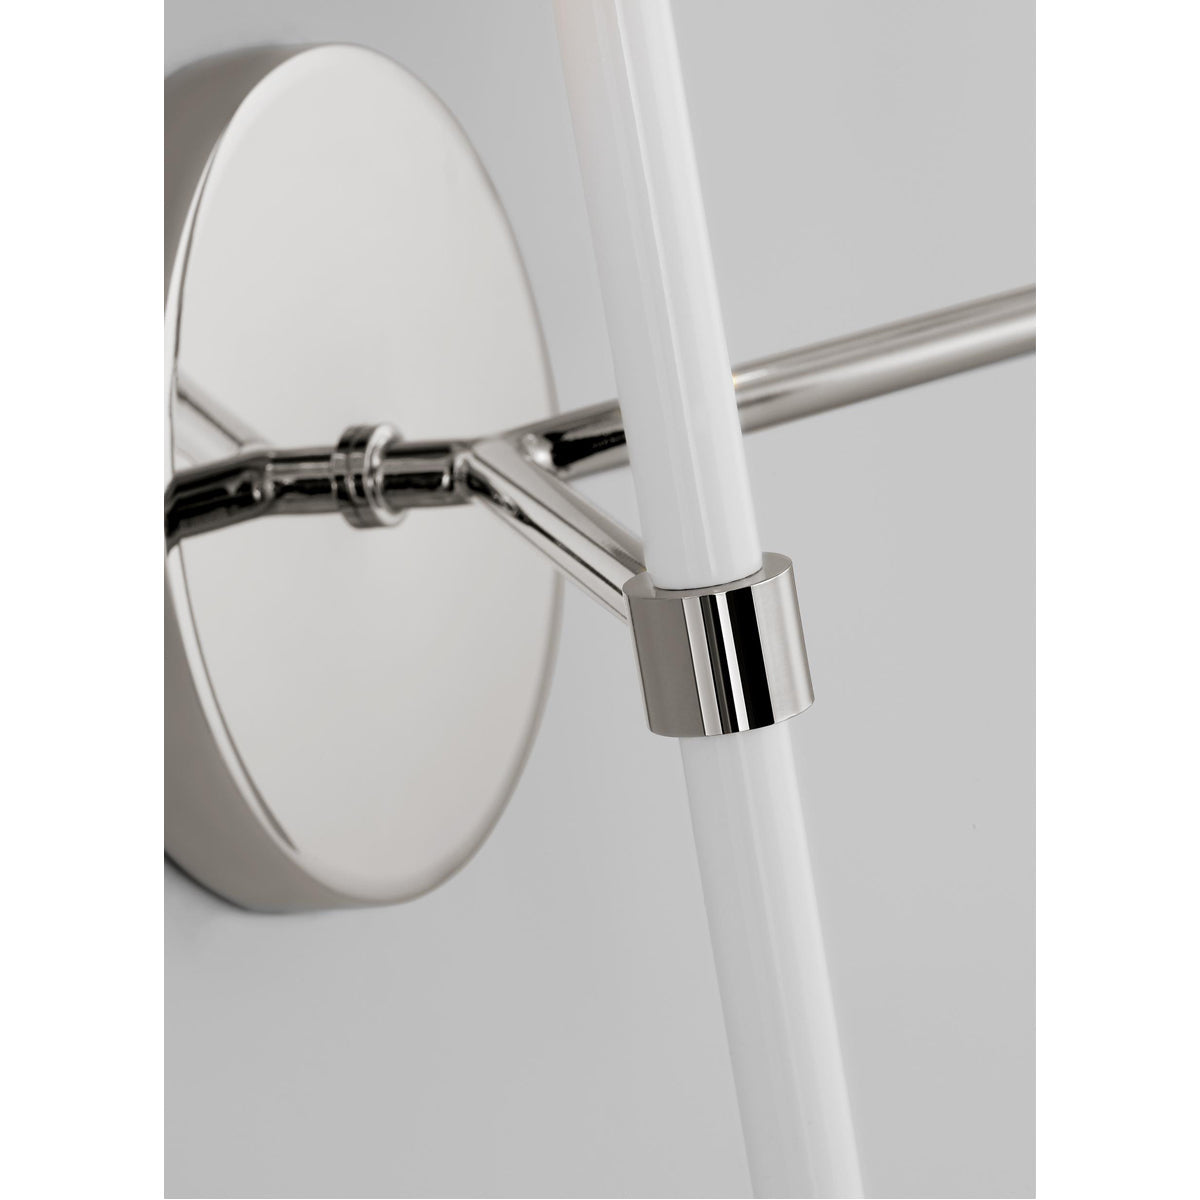 Feiss Kate Spade New York Monroe Double Sconce